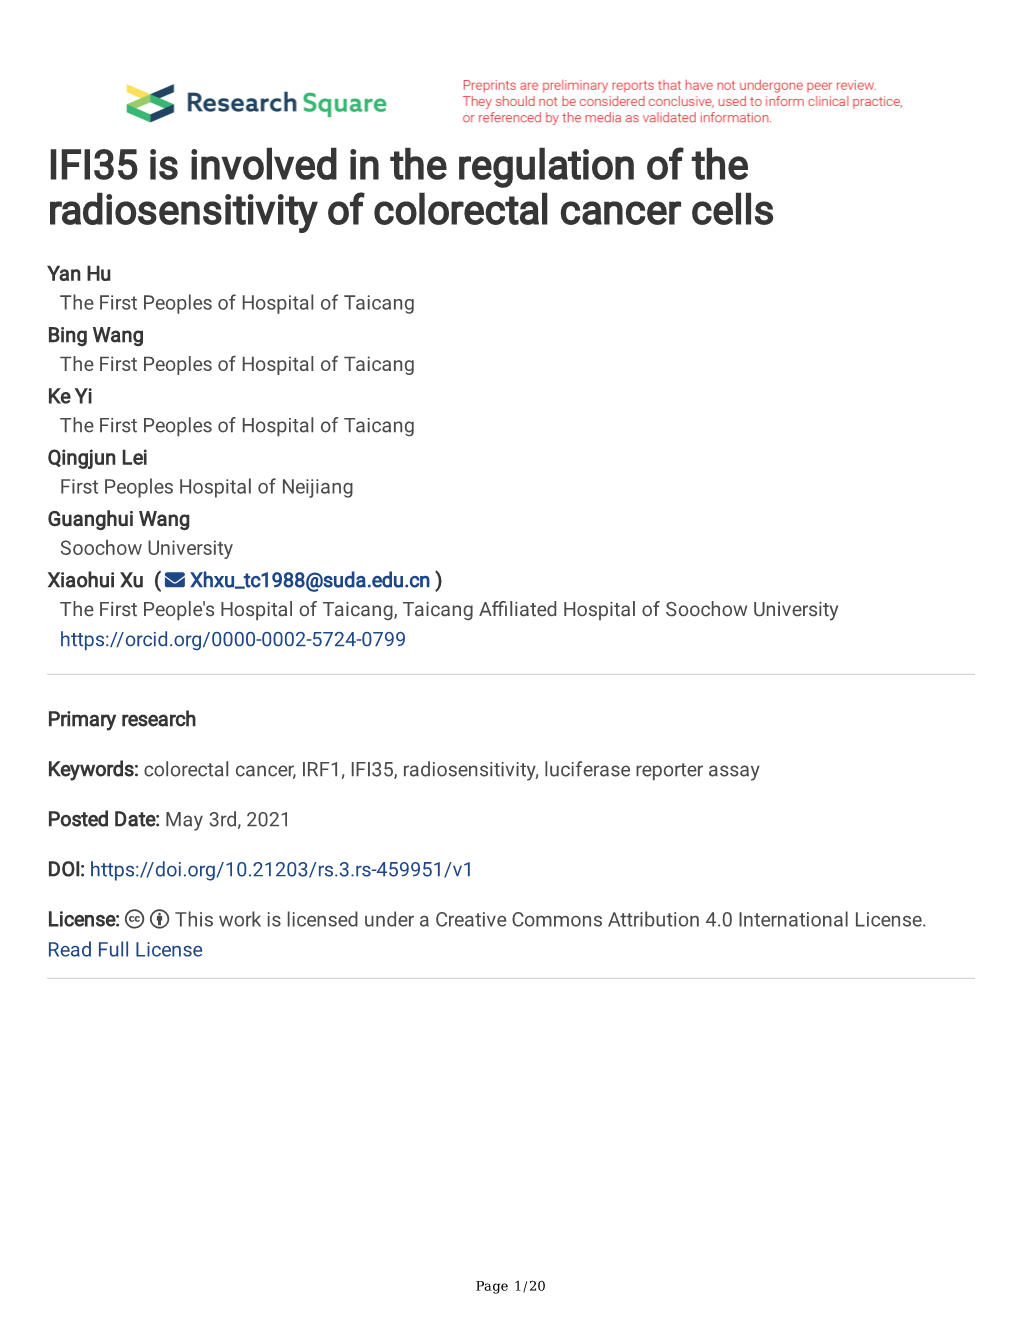 IFI35 Is Involved in the Regulation of the Radiosensitivity of Colorectal Cancer Cells